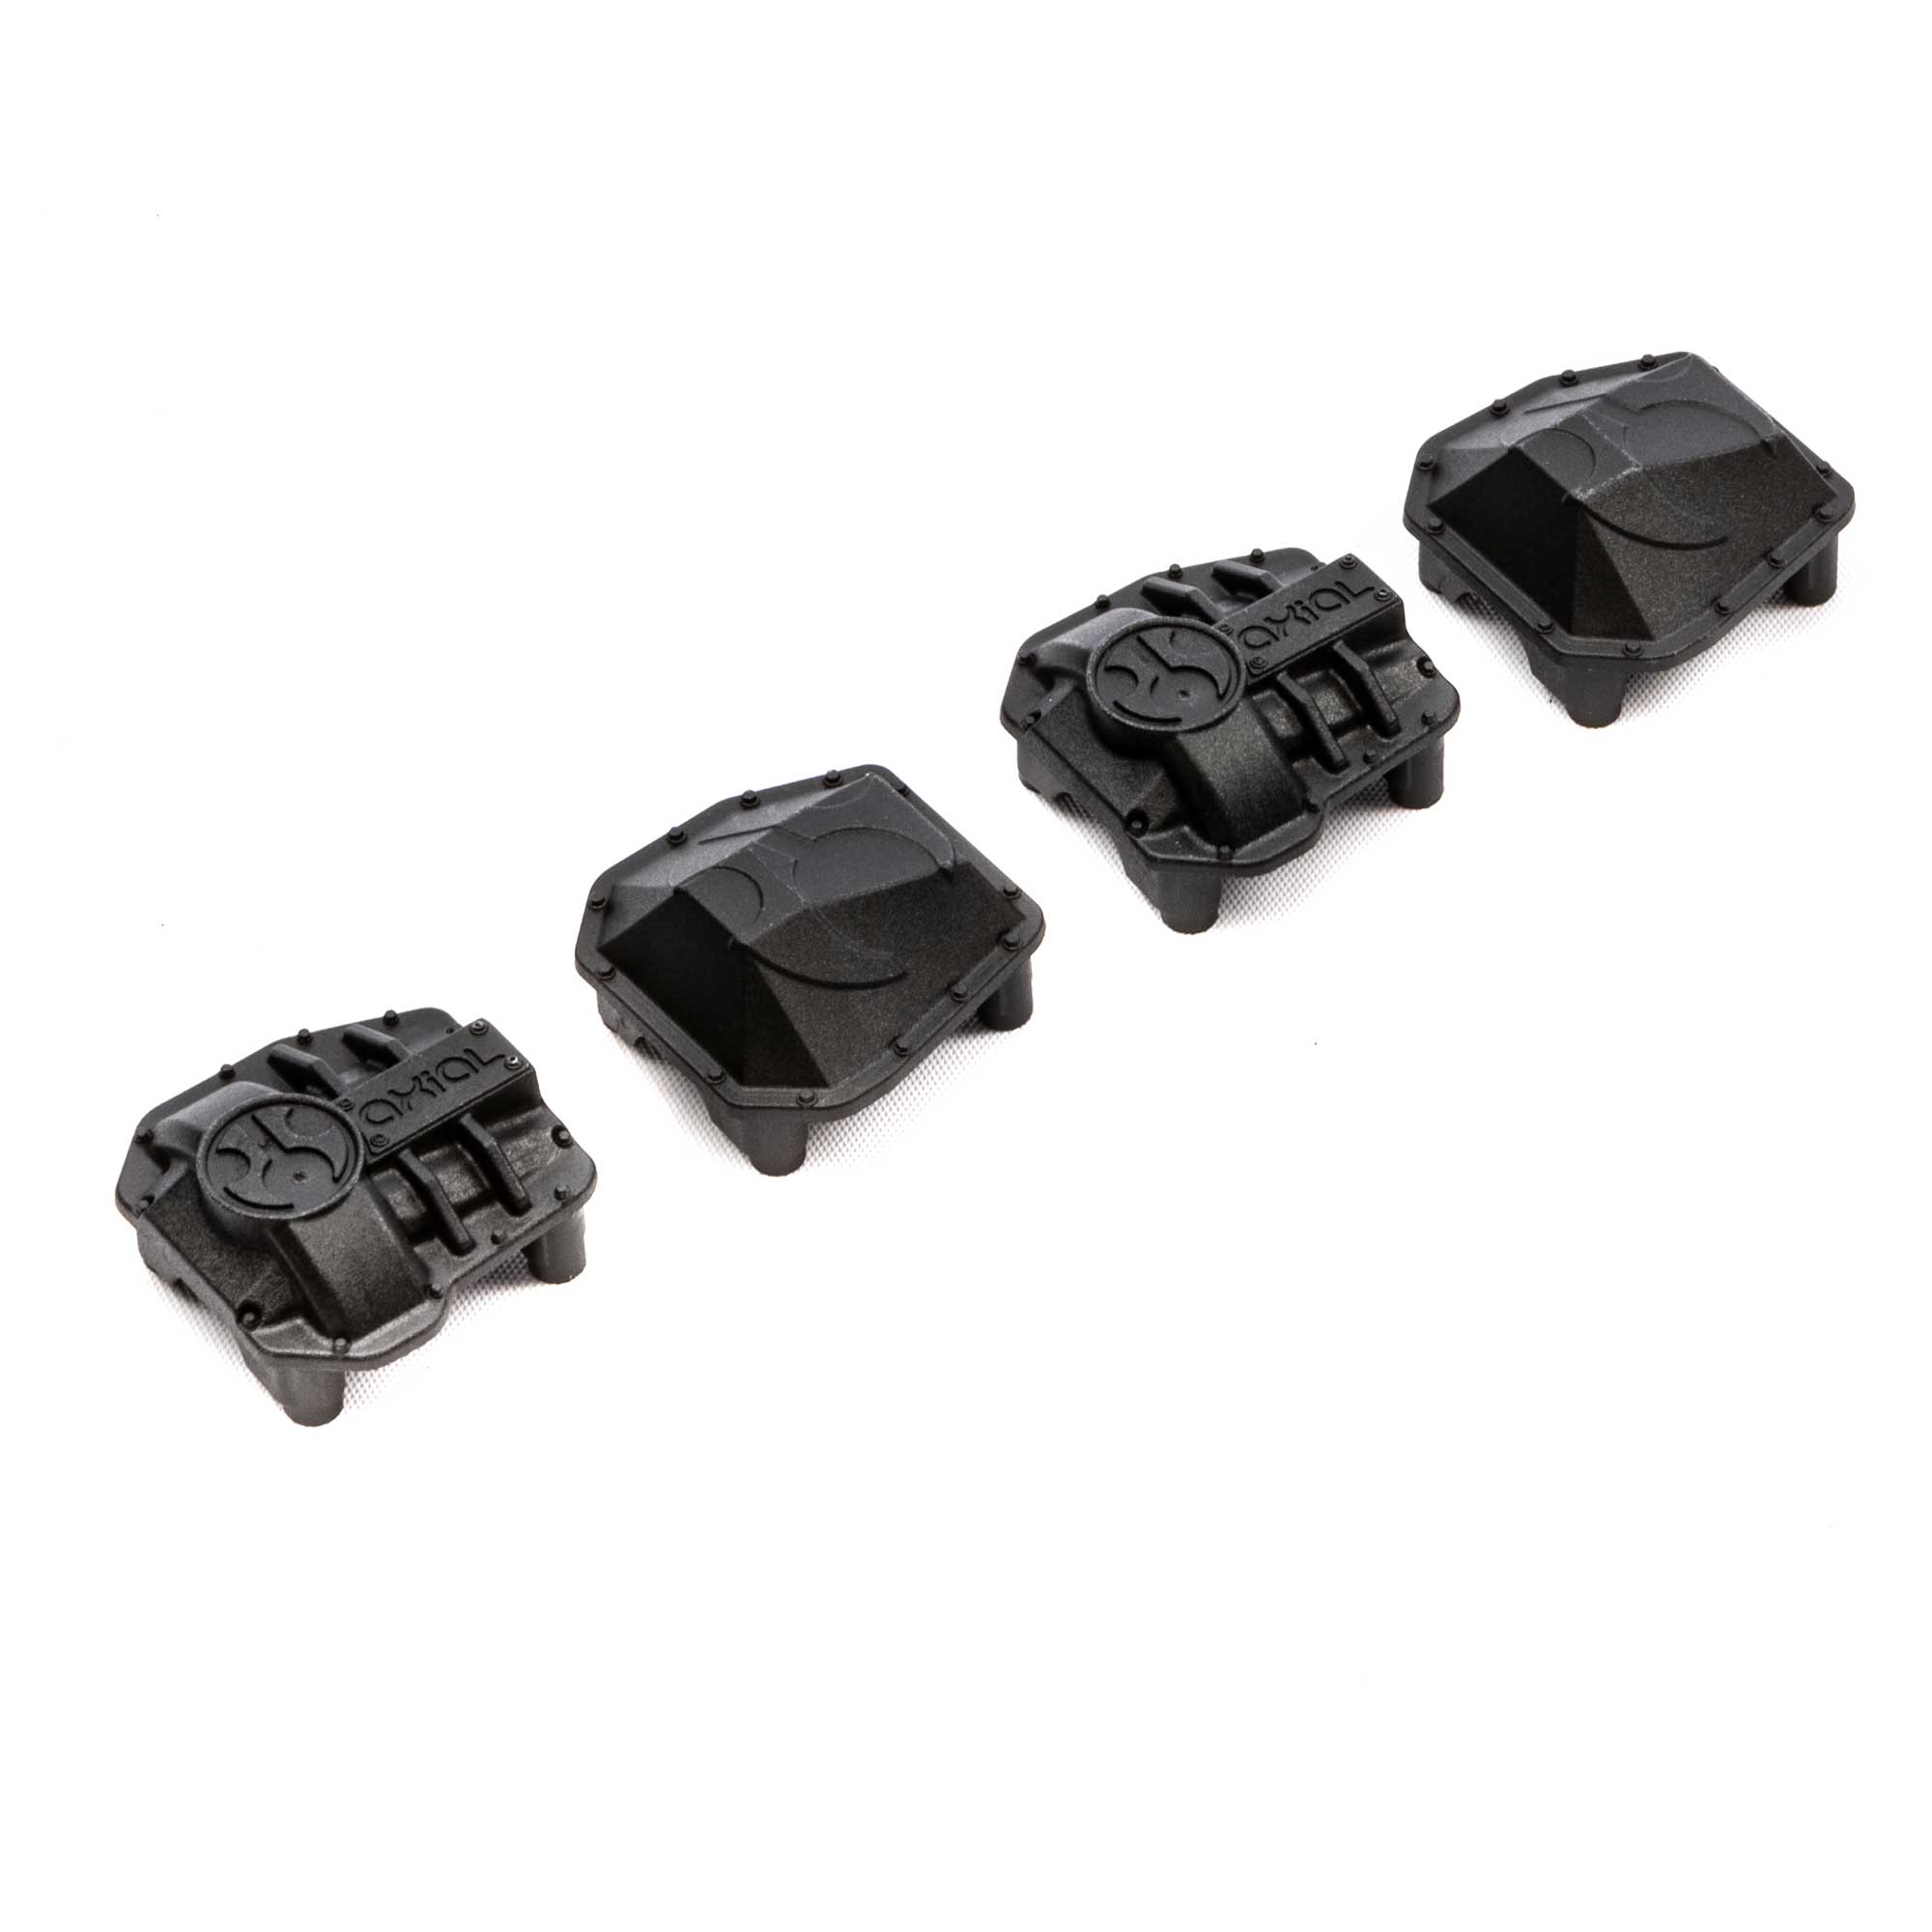 Axial AR45P AR45 Differential Covers, Black: SCX10 III | Horizon Hobby